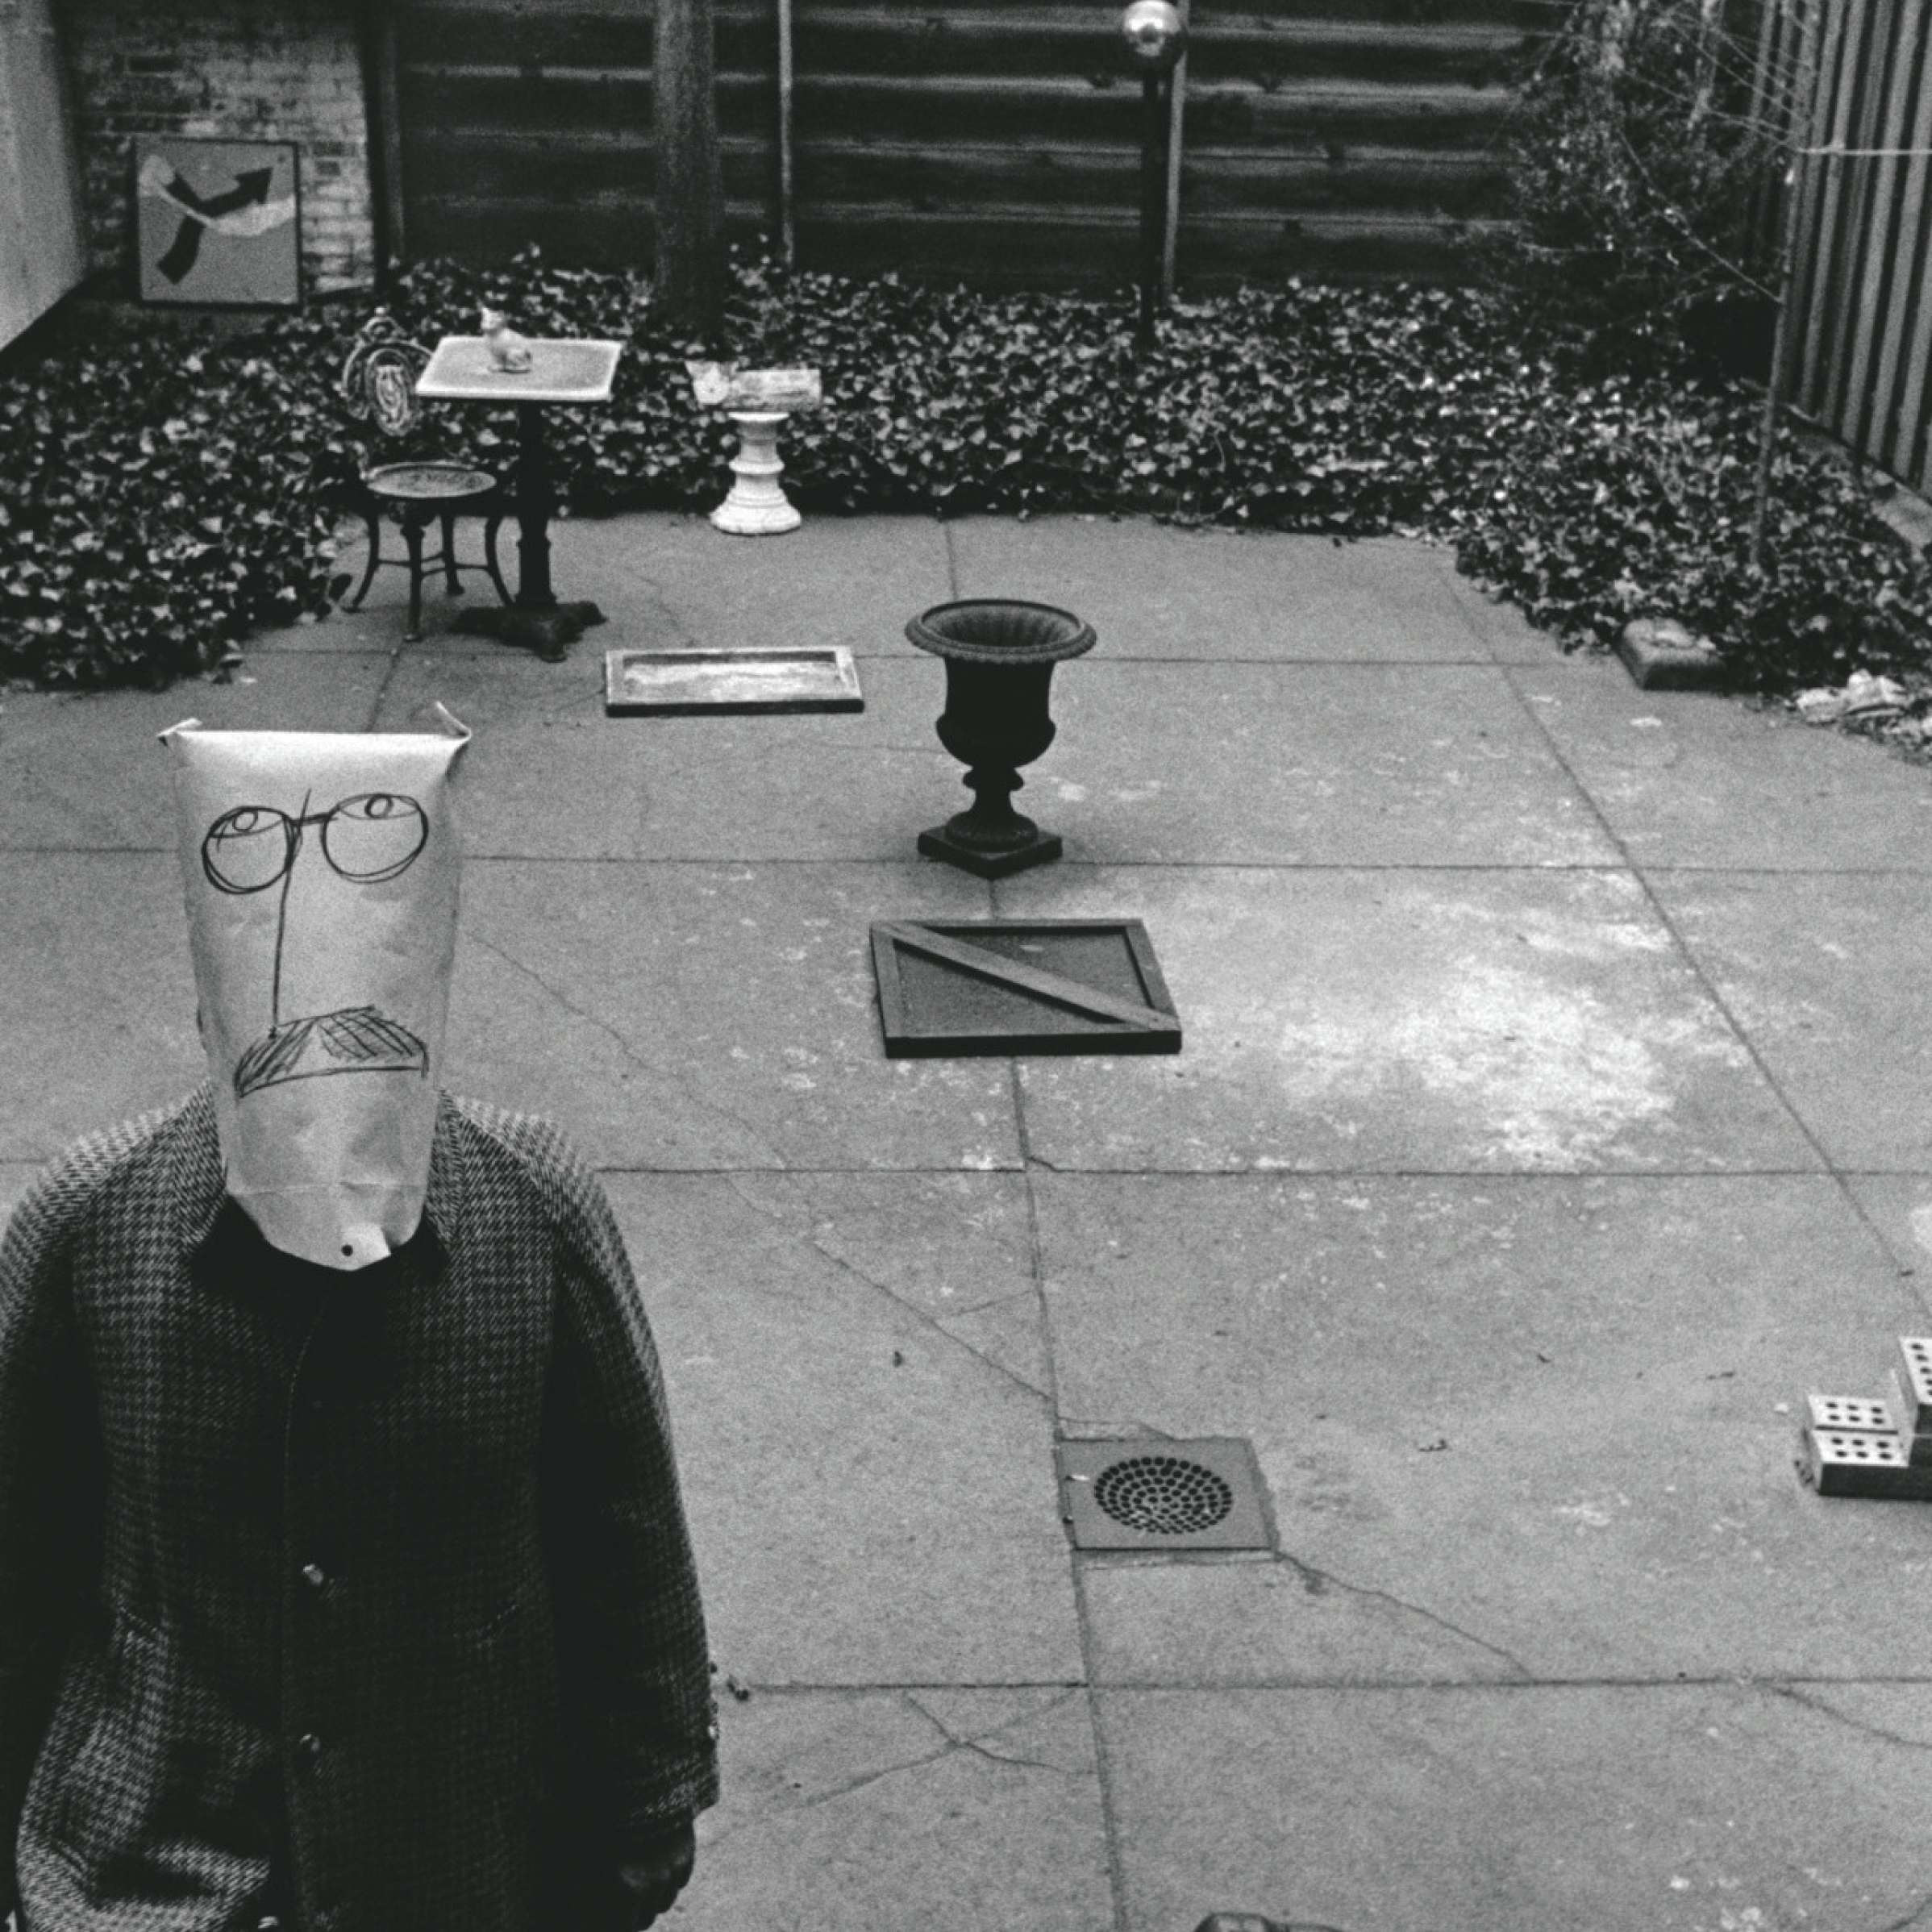  Untitled (from the Mask Series with Saul Steinberg), USA, 1959. Photo by Inge Morath. 